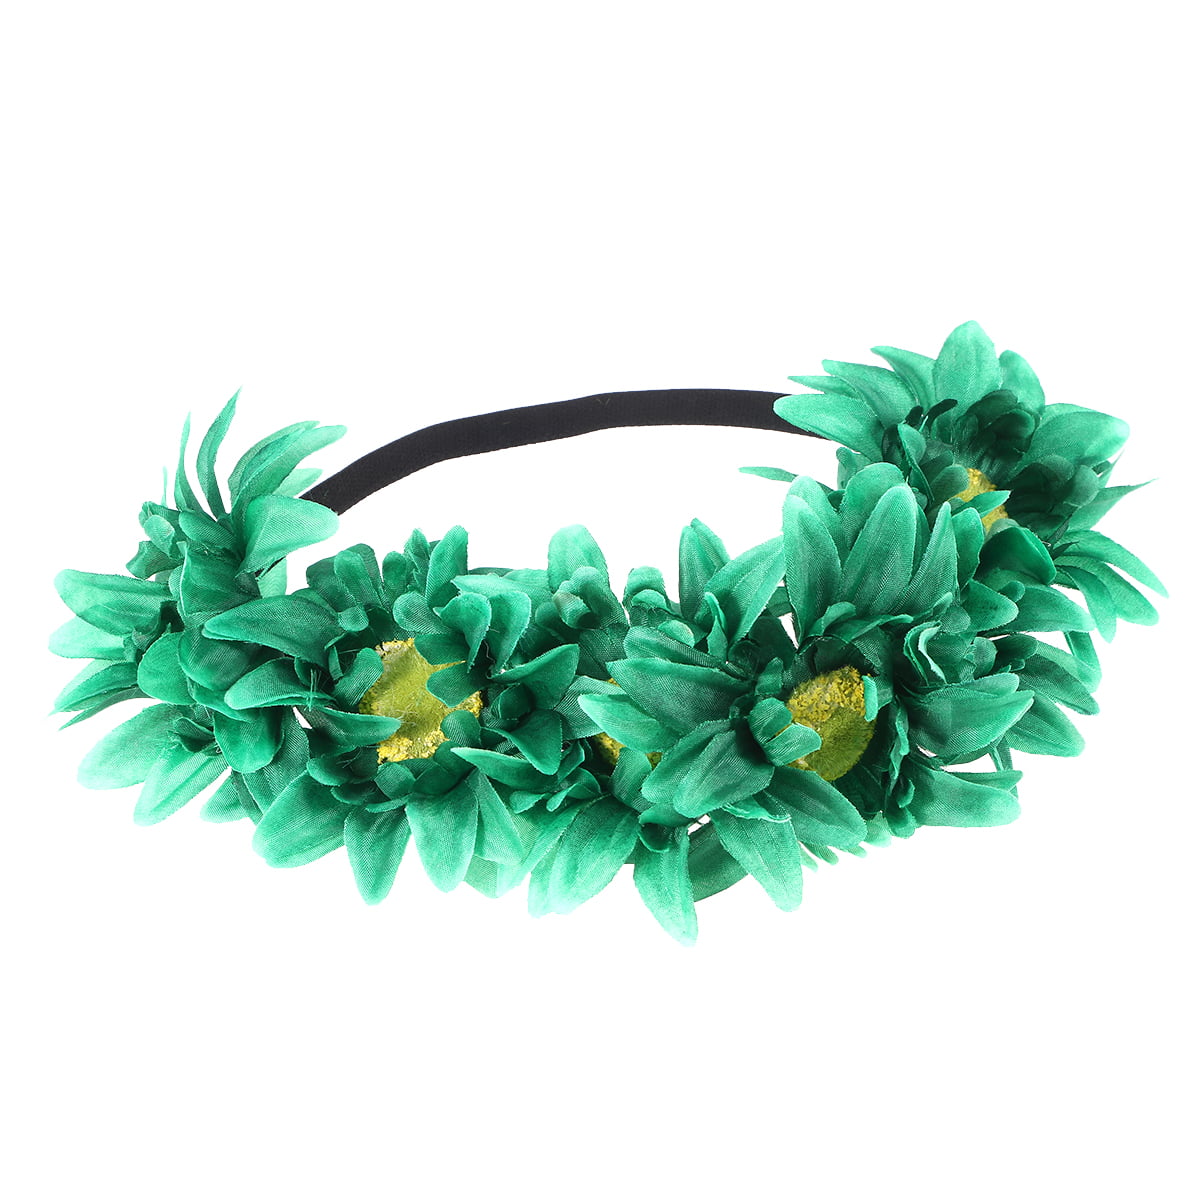 Red 1PC Xmas Wreath Headband Simulated Red Berry Green Plant Hair Hoop Decor